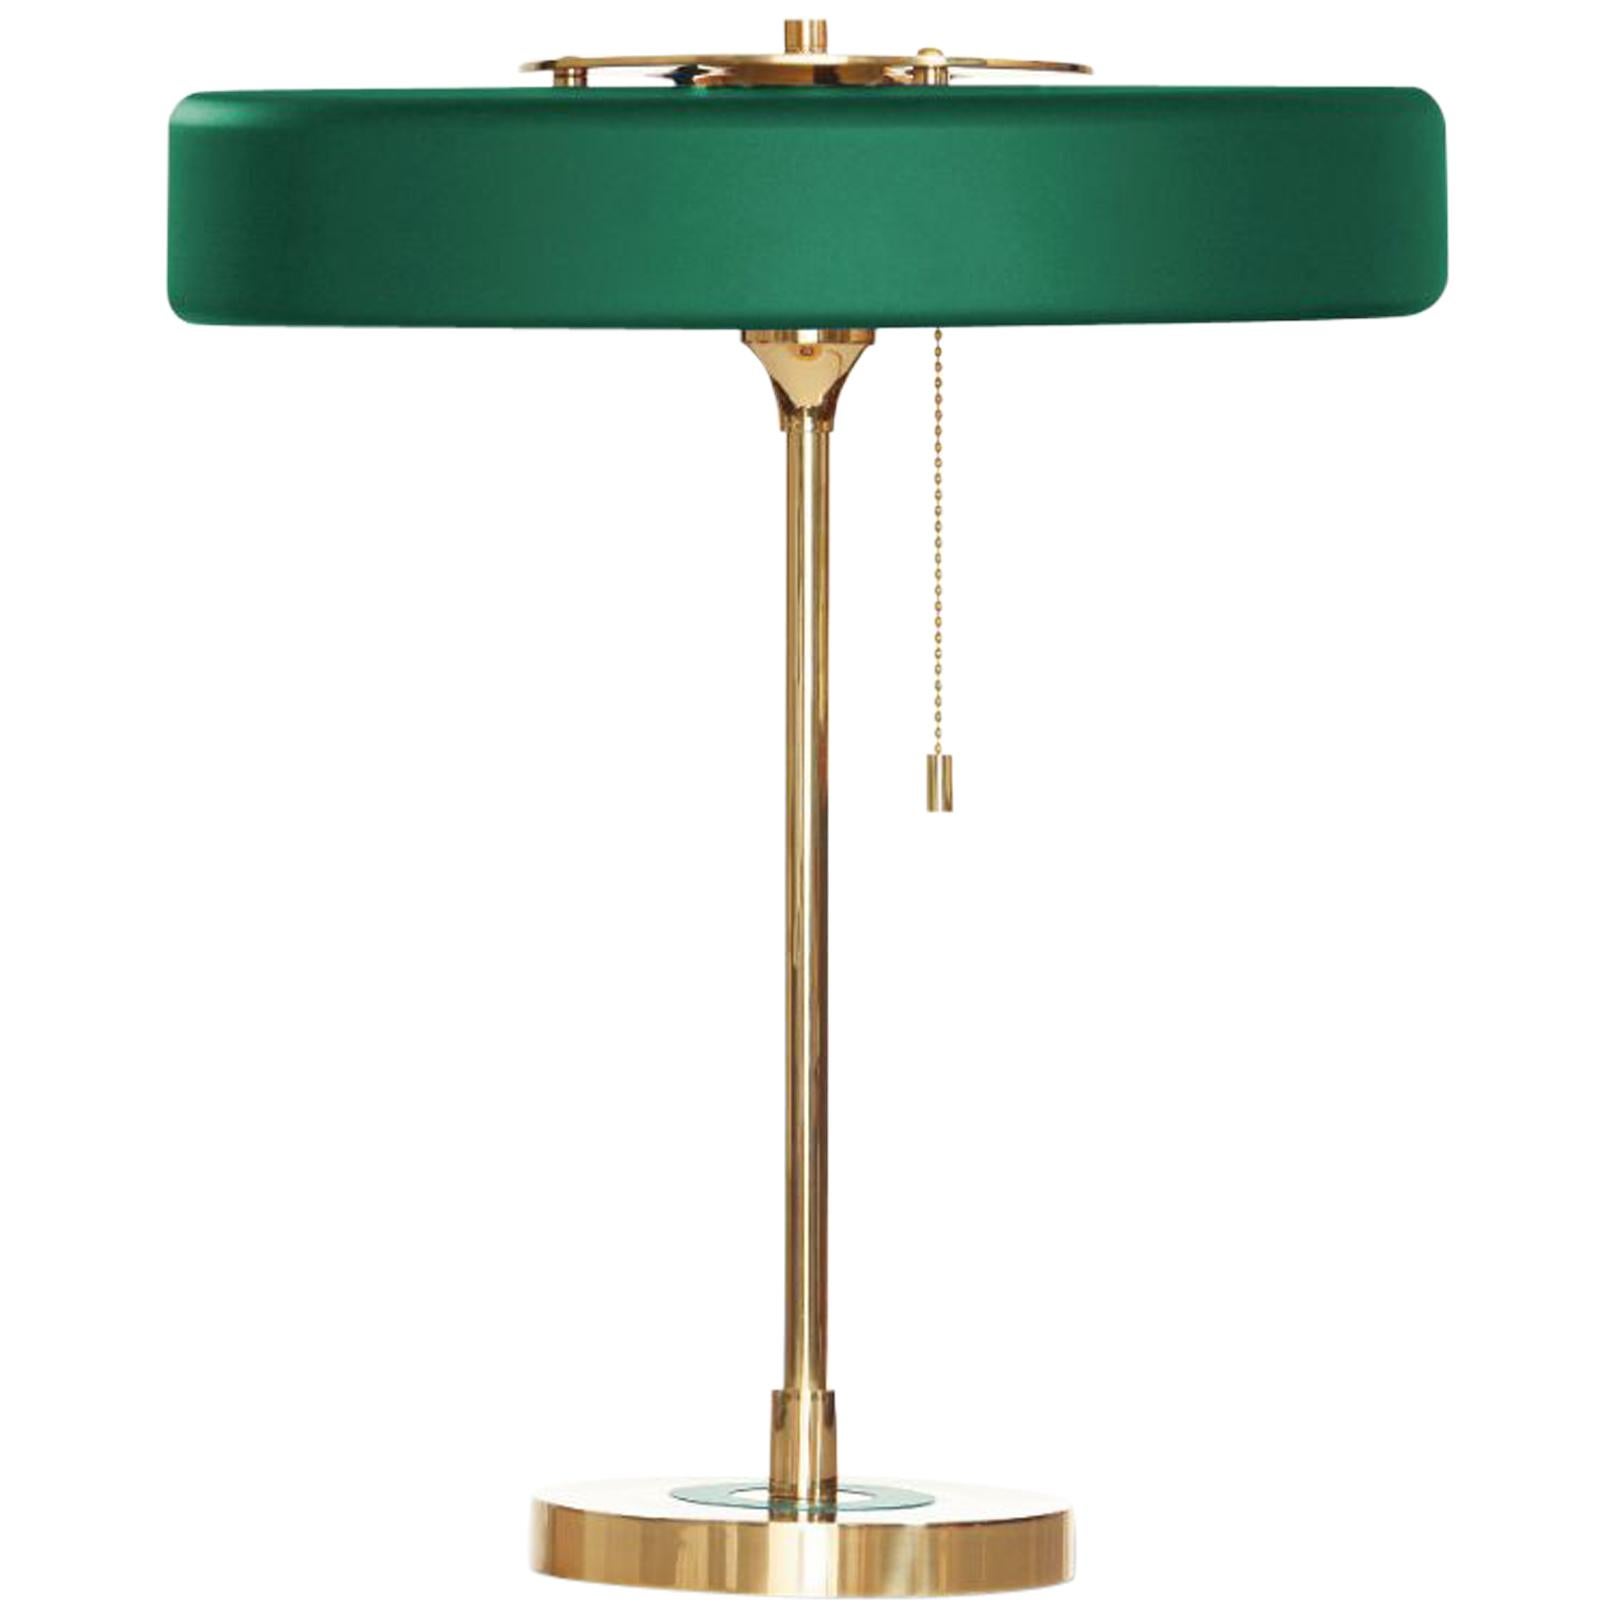 Revolve Table Lamp, Brushed Brass, Green by Bert Frank